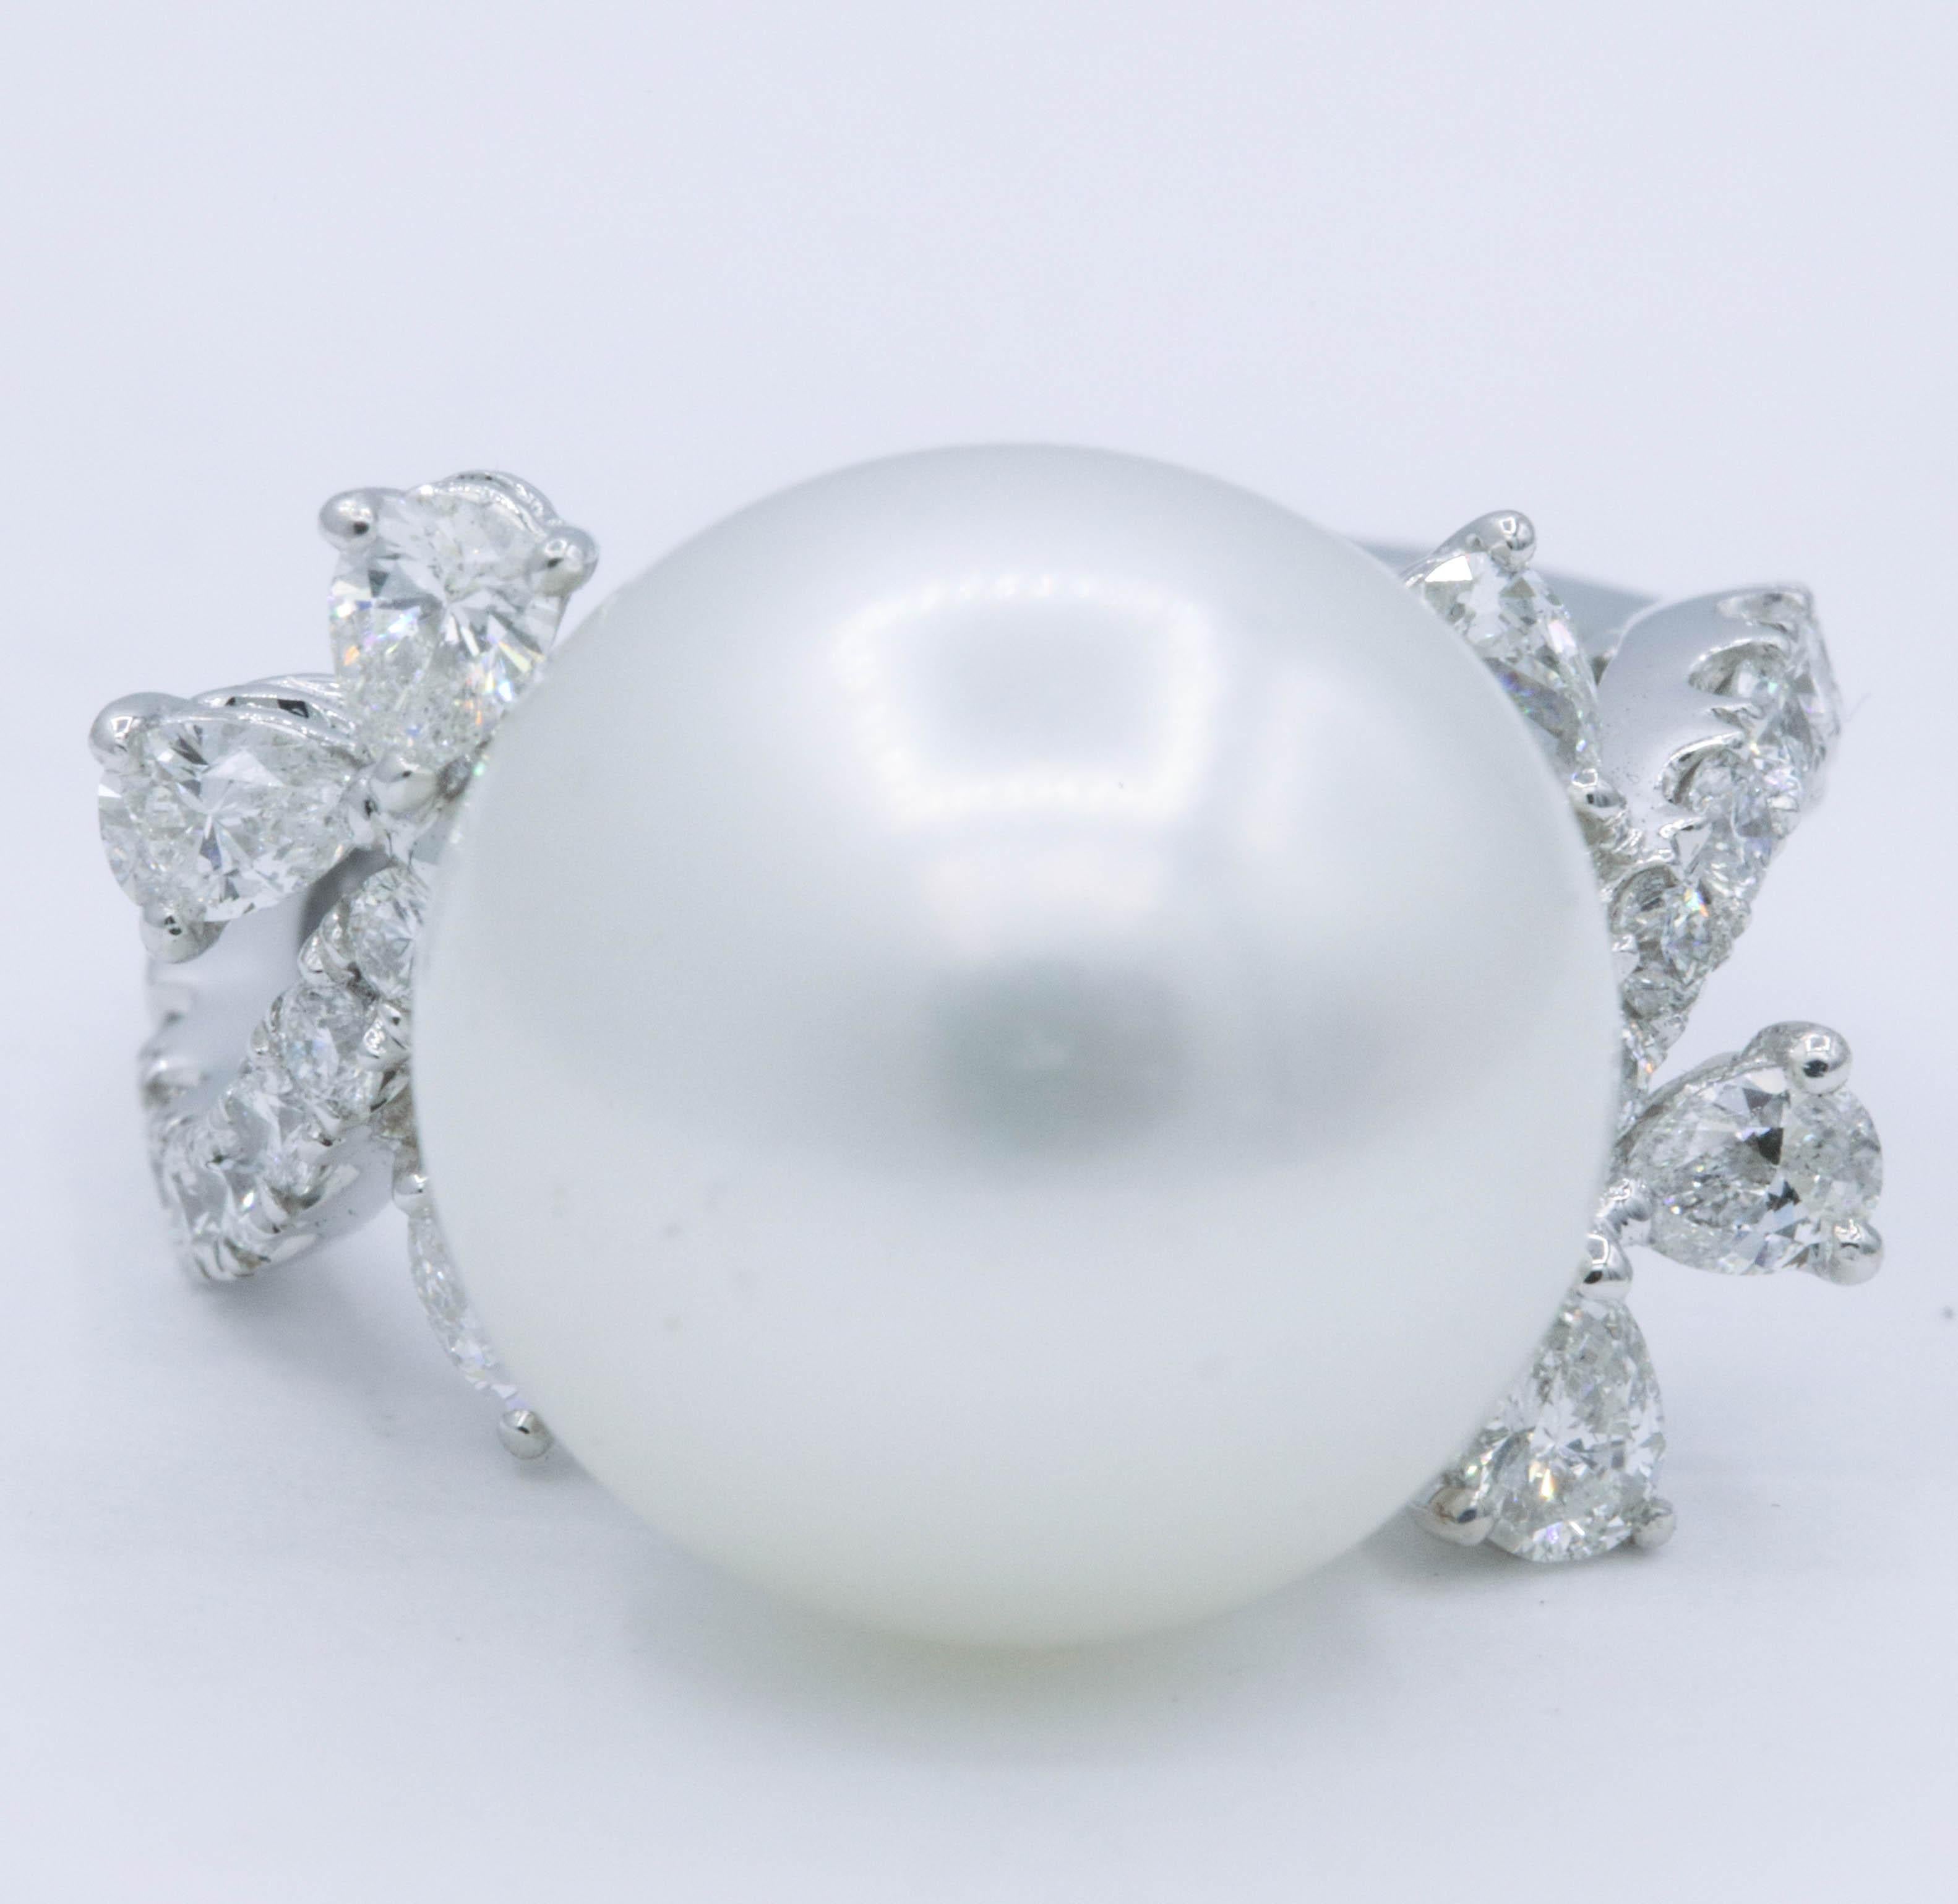 18K White gold ring featuring one center pearl, 14.2mm, flanked with 6 pear shape diamonds, 0.59 carats, and 14 round diamonds weighing 0.40 carats. 
Color: G-H
Clarity: SI
